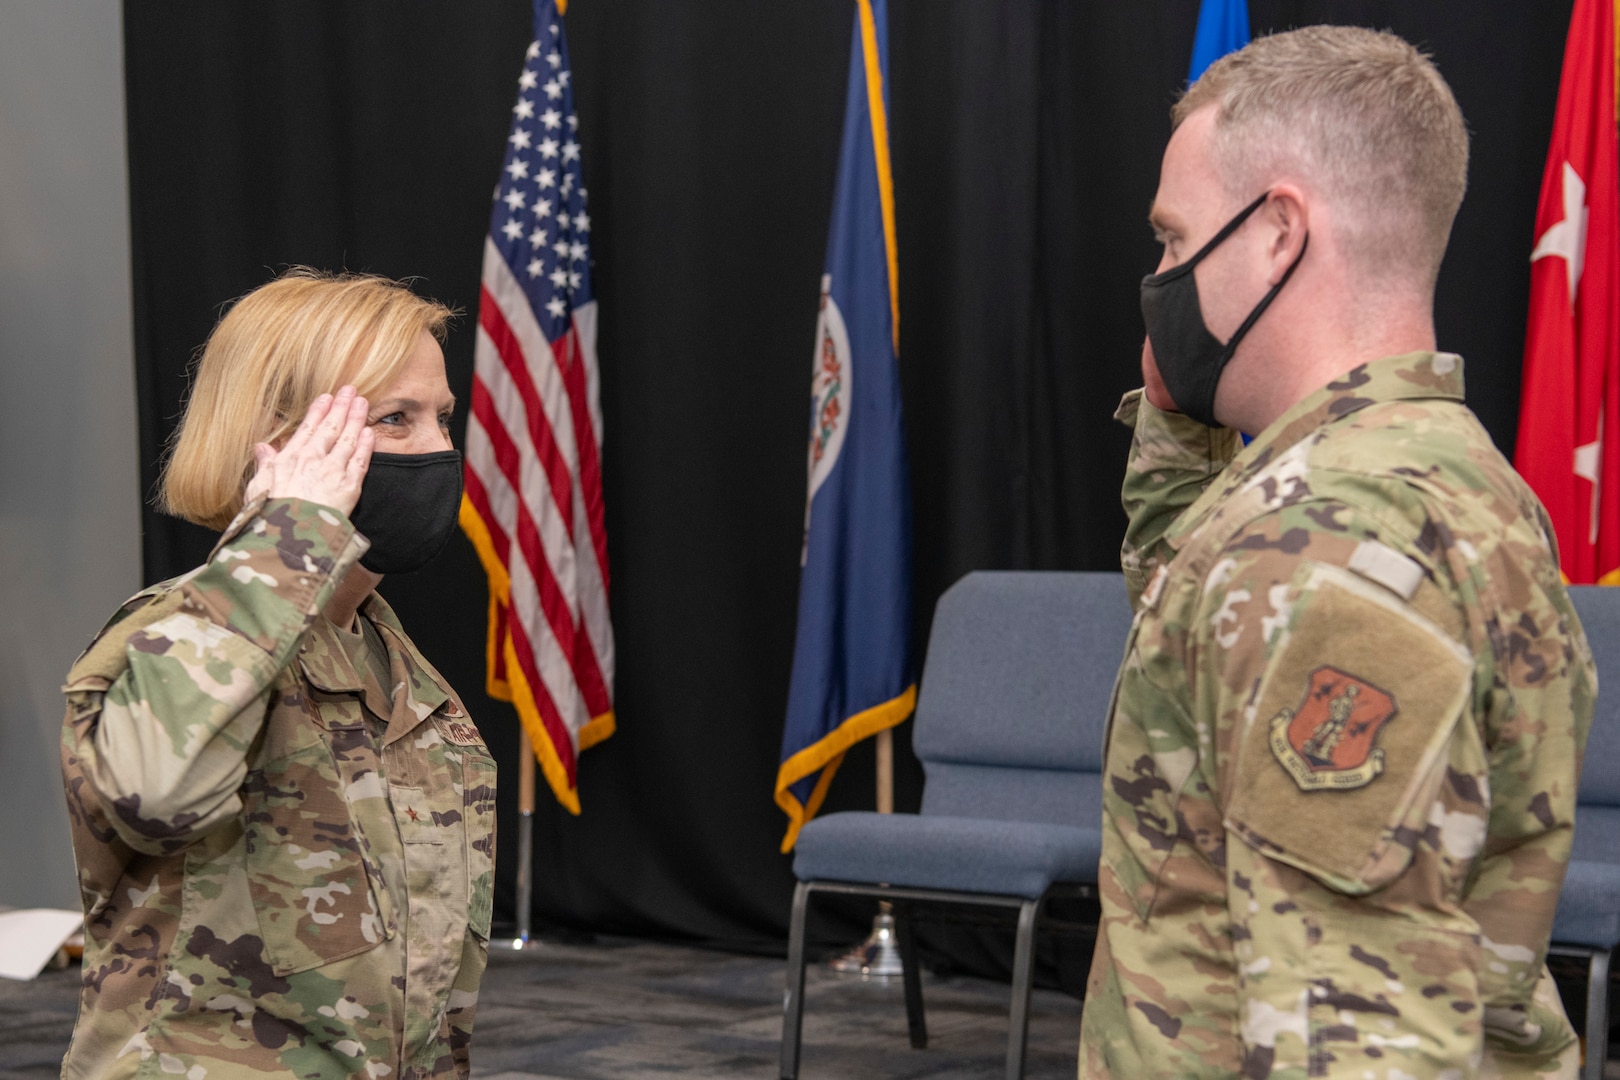 Brig. Gen. Toni M. Lord, Virginia National Guard air component commander, presents her challenge coin to members of the 856th Cyber Protection Team prior to an end of mobilization ceremony Feb. 25, 2022, in Hampton, Virginia.